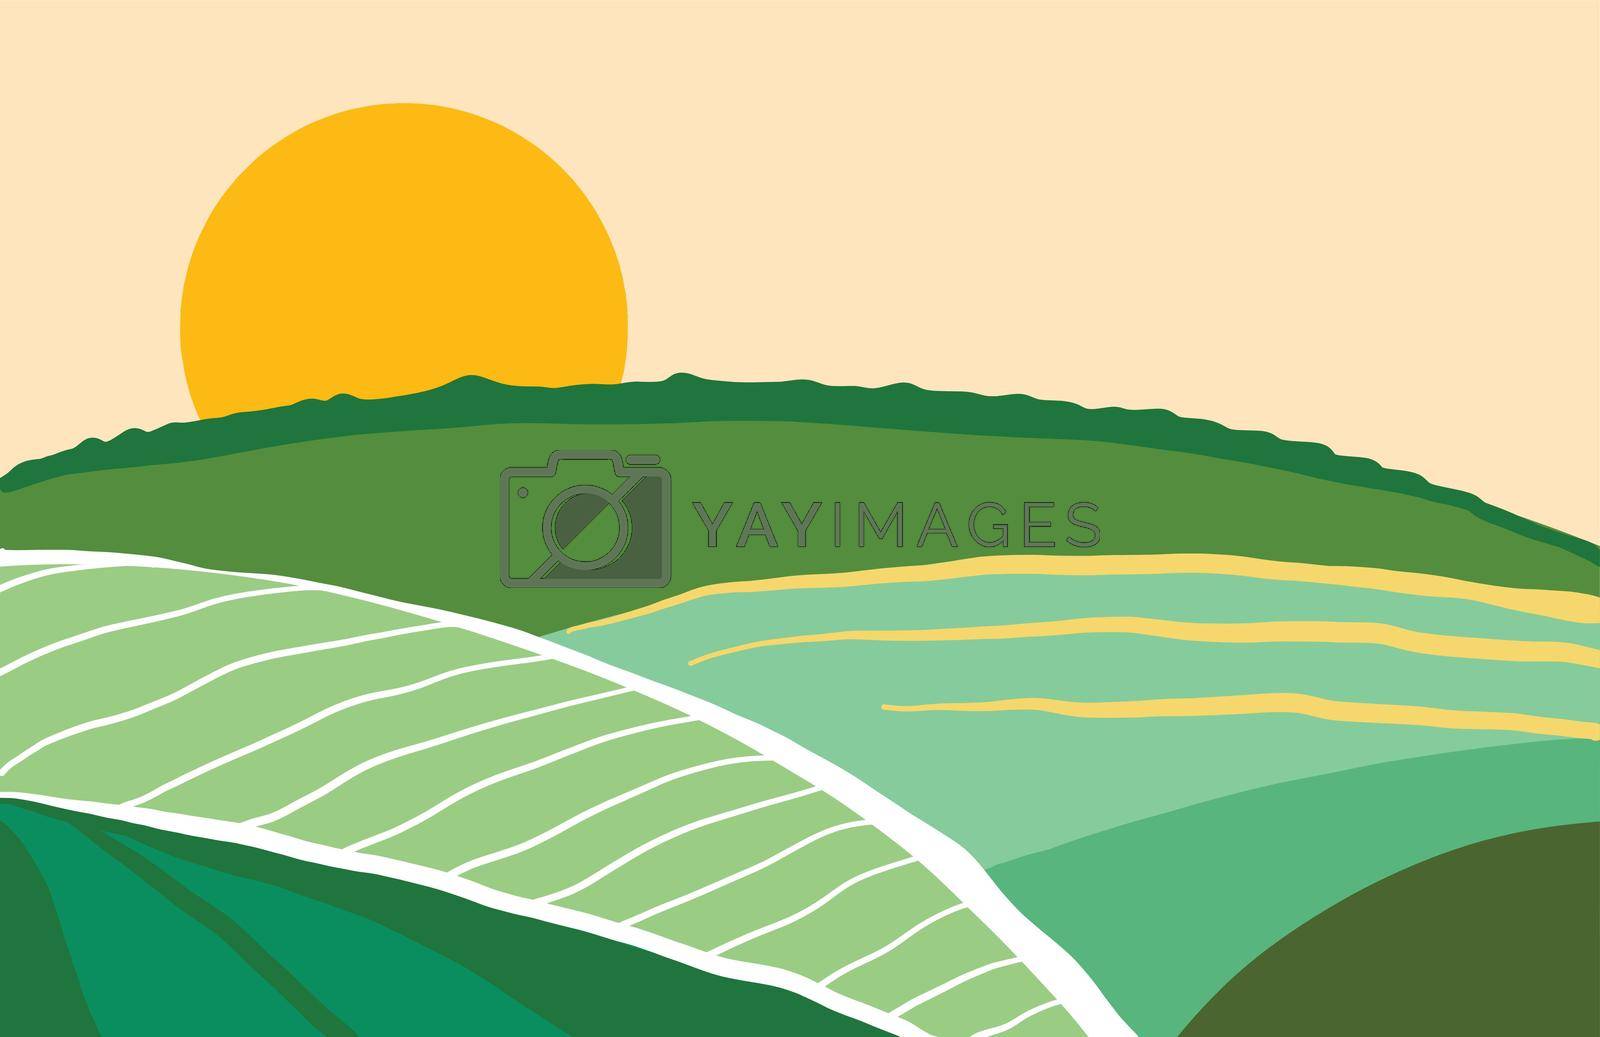 Landscape in a flat style with bright colors. The fields and the sun. Summer Vector